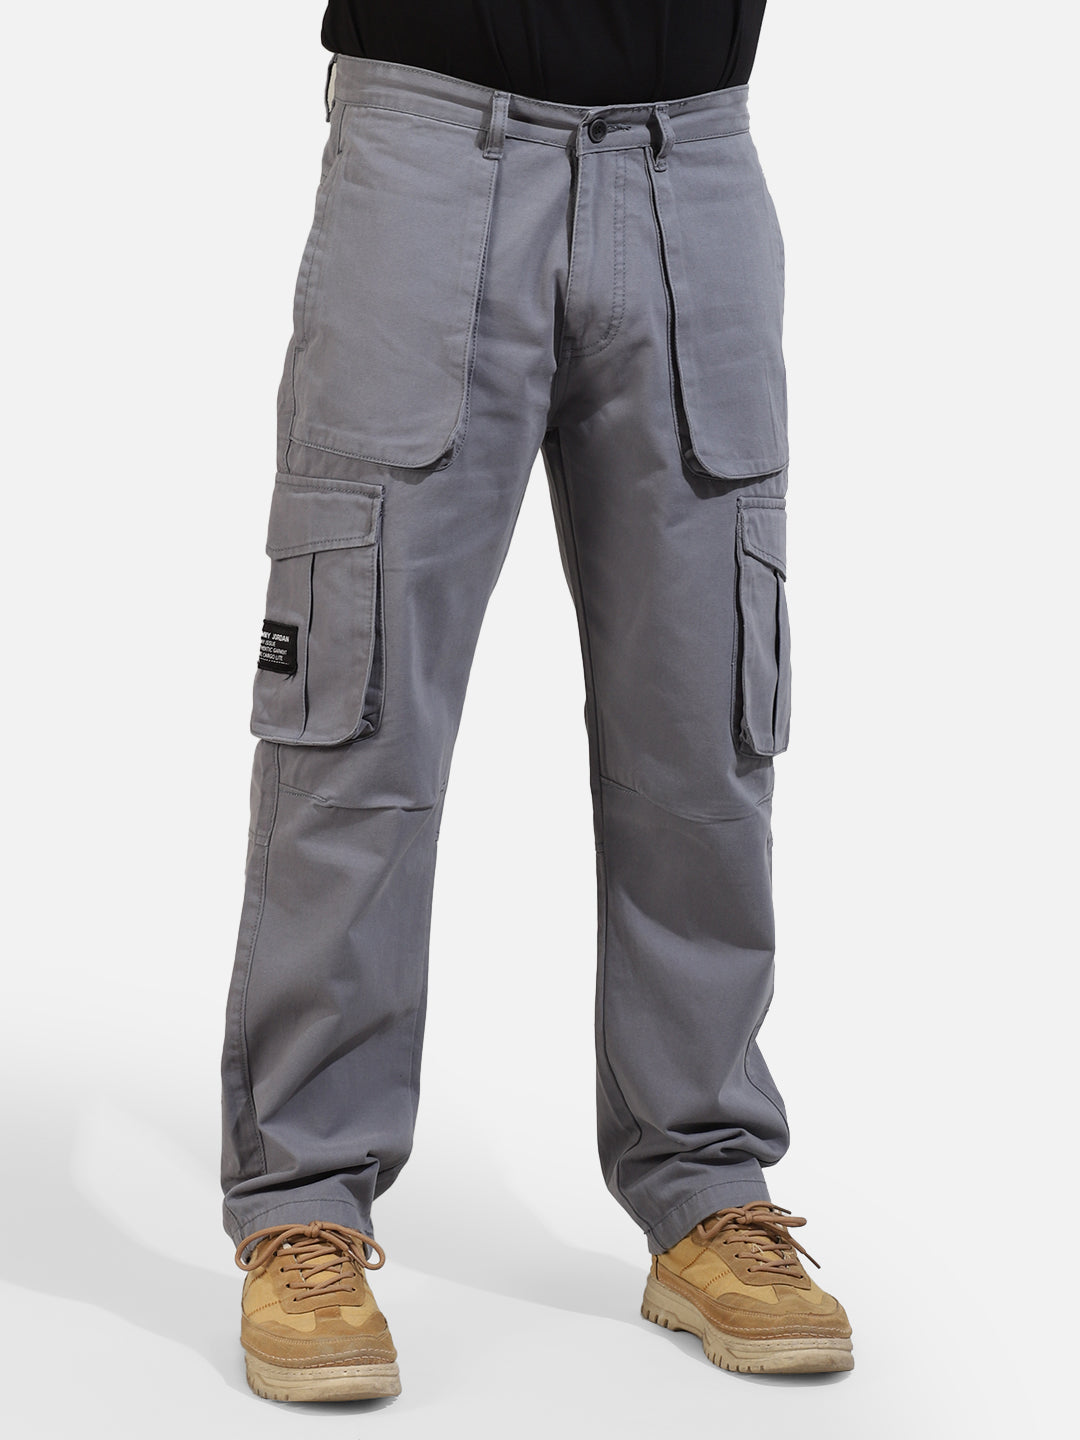 Ash Grey Cotton Twill Tactical Baggy Fit Cargo